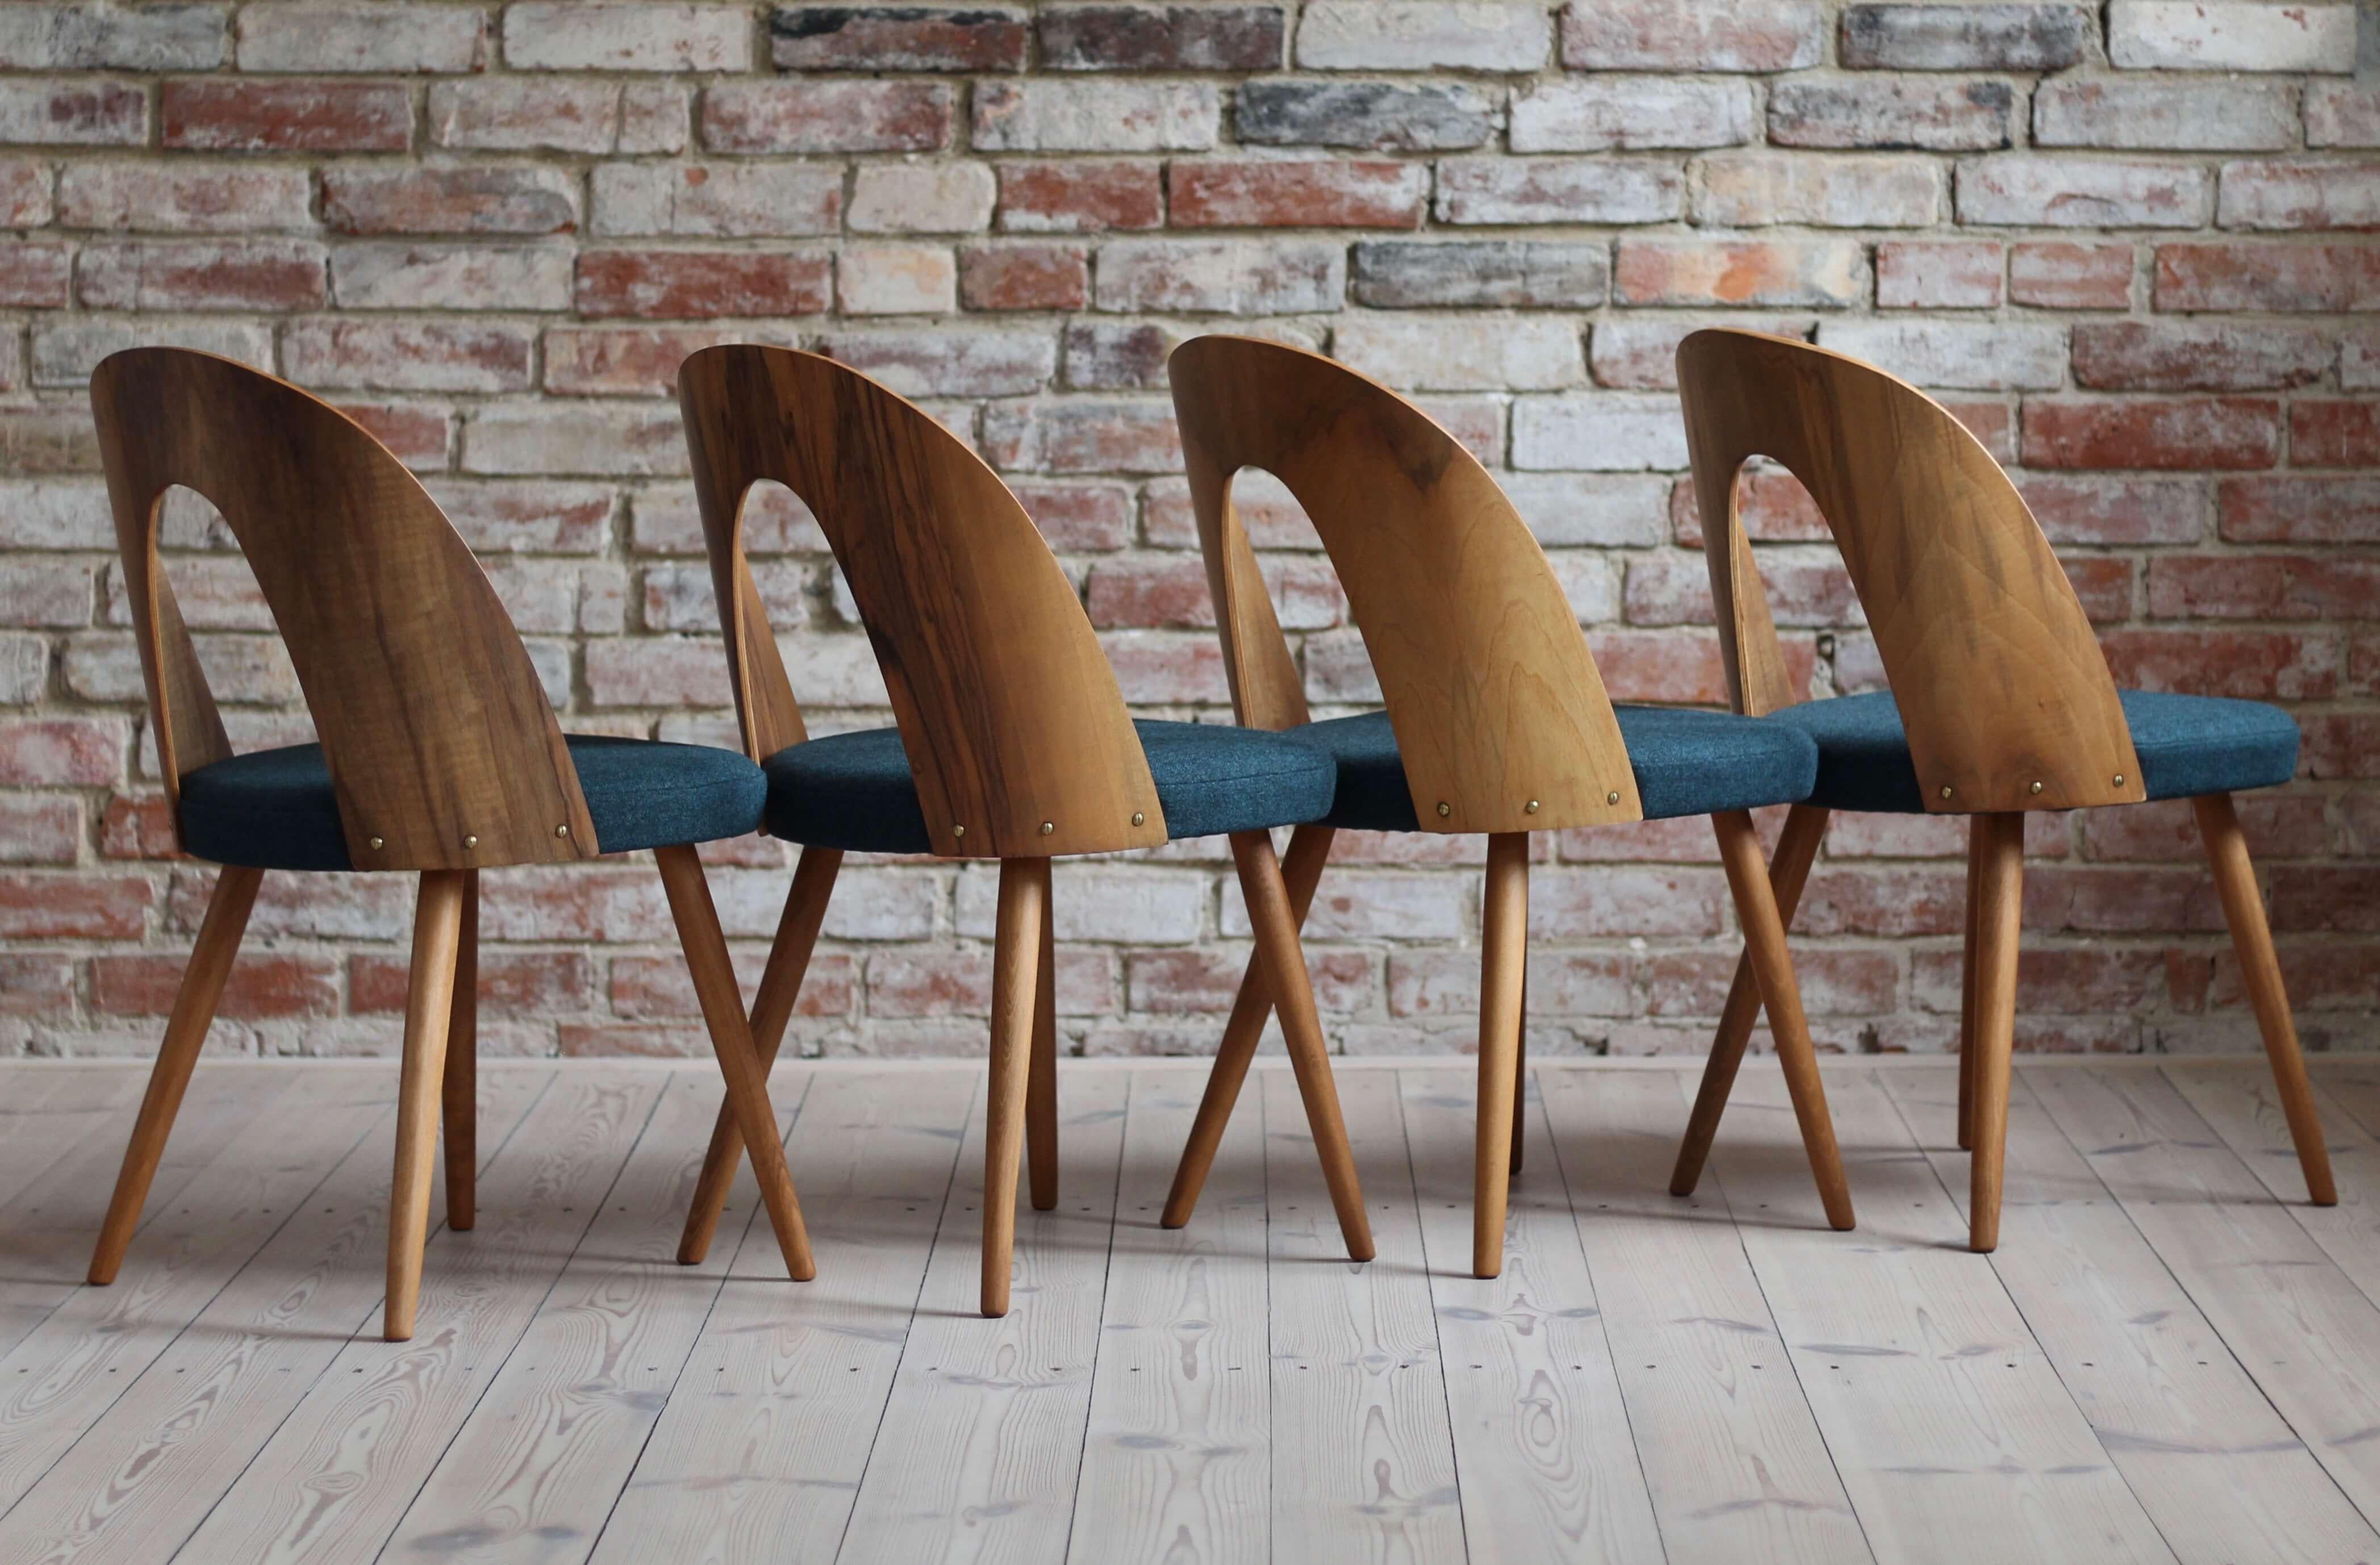 Oiled Set of 4 Midcentury Dining Chairs by A. Šuman, Reupholstered in Kvadrat Fabric